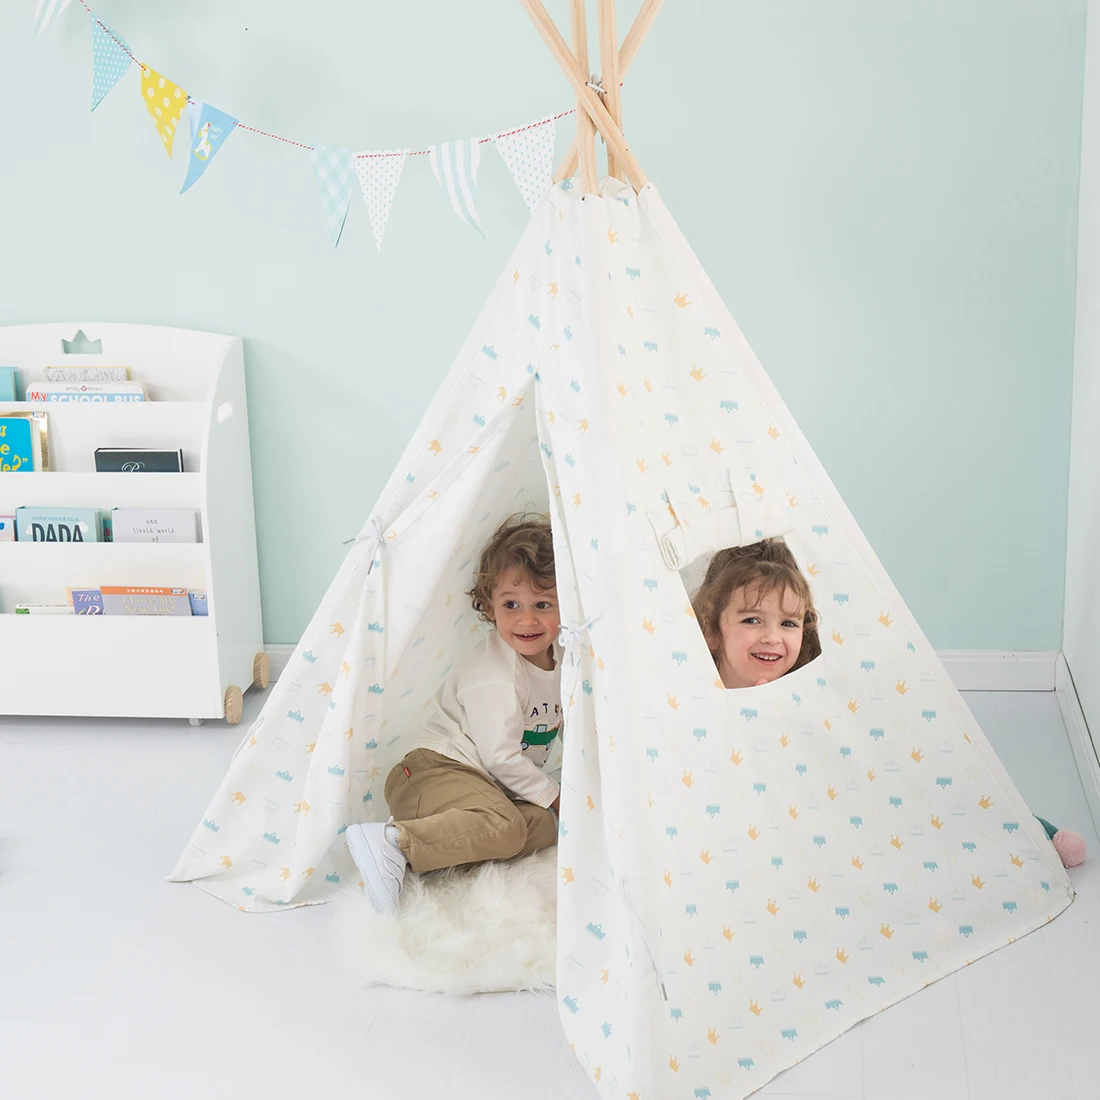 
Custom Foldable Girls Teepee House Toy Kids Children Indoor Baby Play Tent with window 